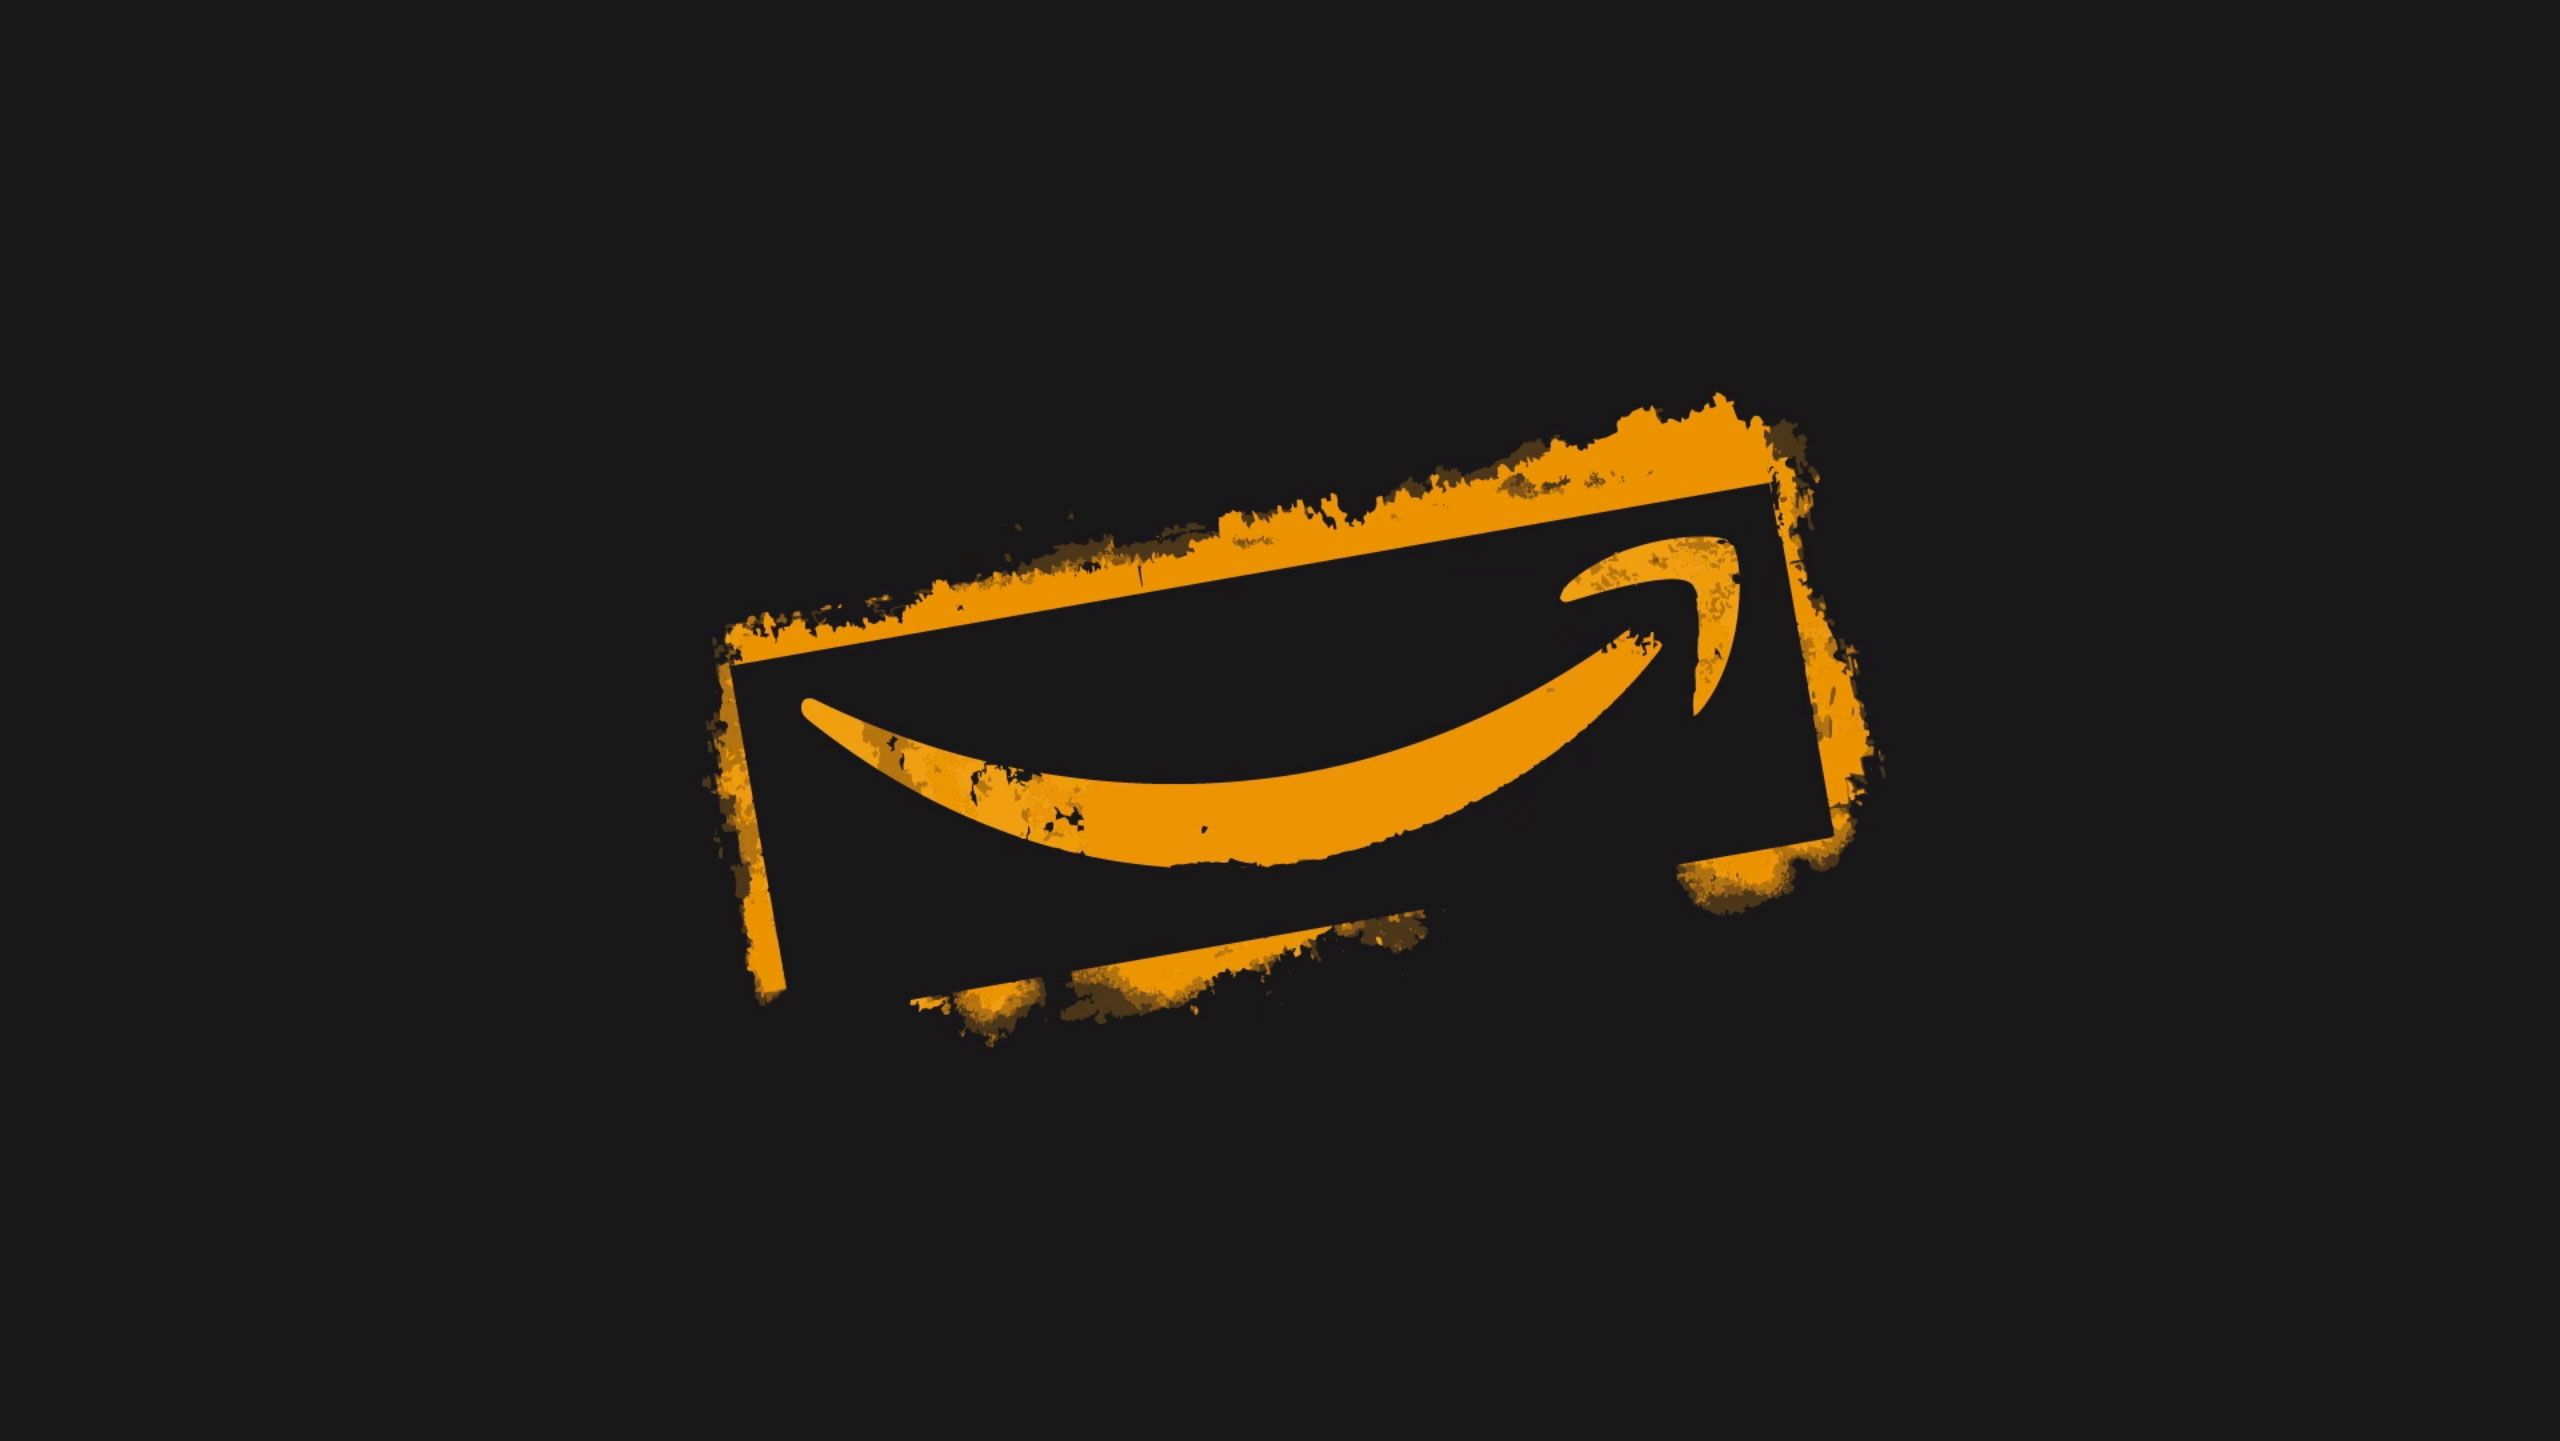 Best 57+ Amazon Prime Wallpapers on HipWallpapers